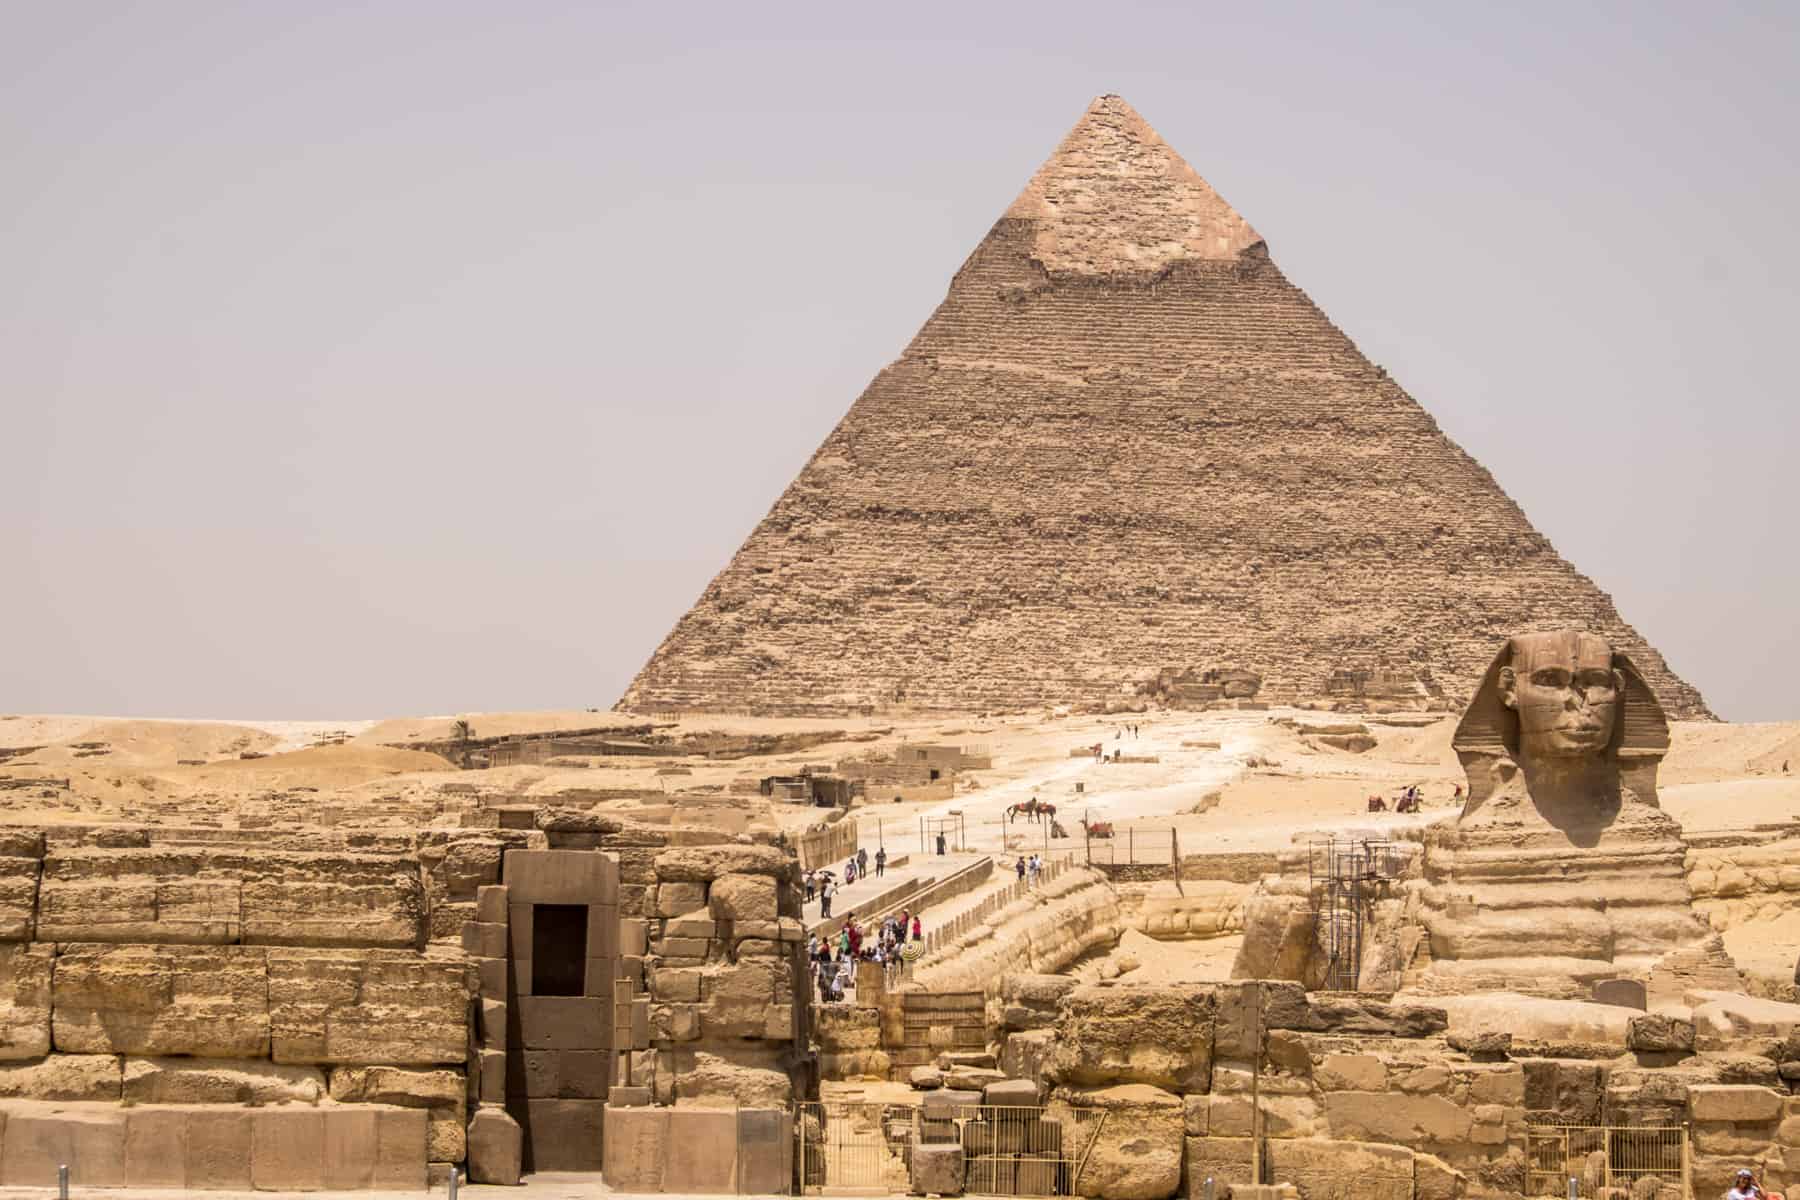 A great pyramid of Giza looms behind the sphinx that sits in front of it as part of a necropolis complex, in the dusty desert area of Gize in Egypt